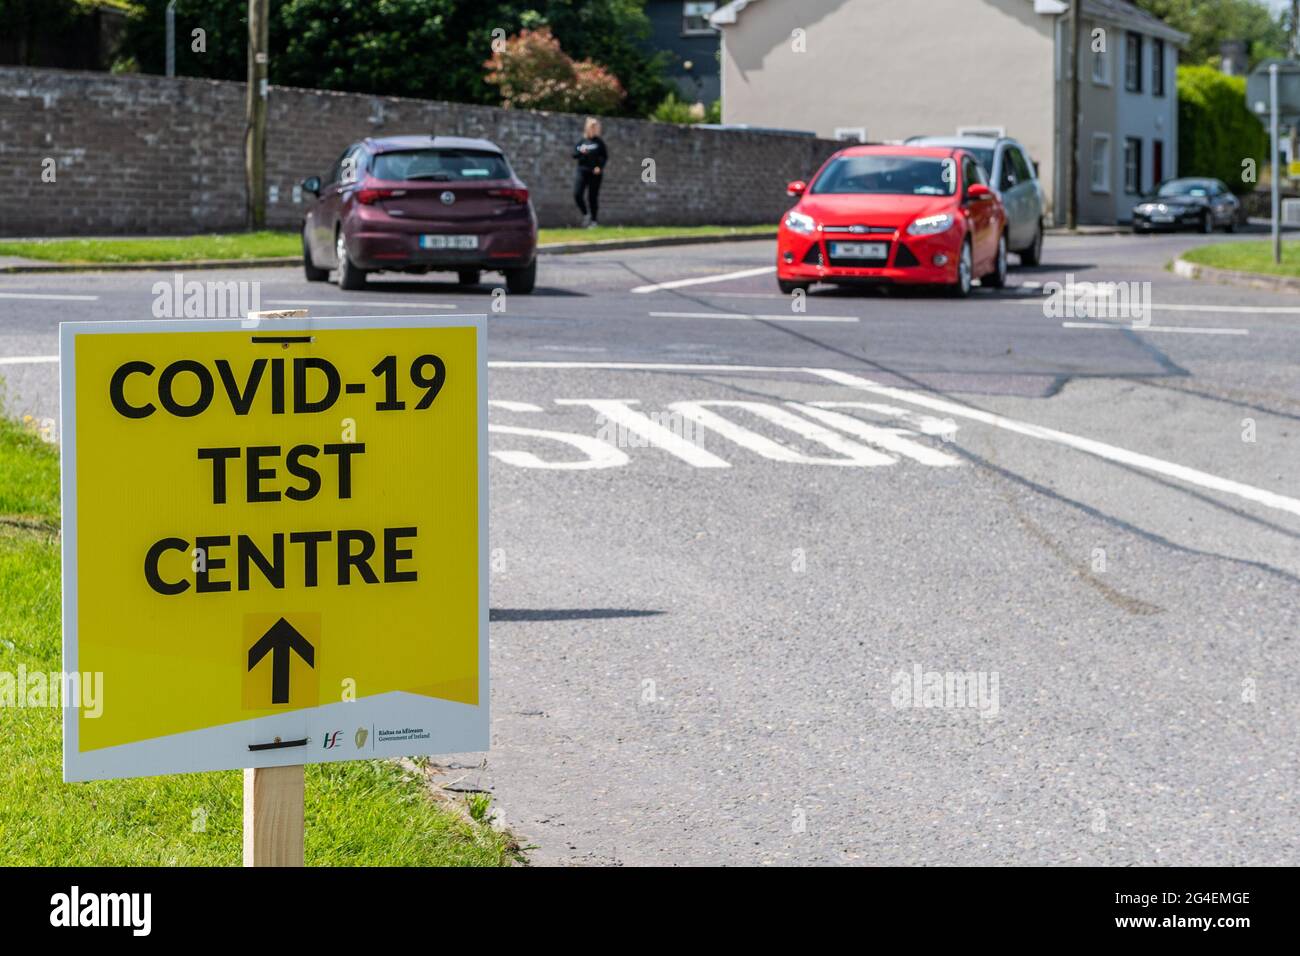 Bandon, West Cork, Ireland. 21st June, 2021. A COVID-19 Test Centre opened today at Bandon Community Hospital. The test centre is open today and tomorrow to facilitate walk-in tests from 11am to 7pm with no appointment needed. Credit: AG News/Alamy Live News Stock Photo